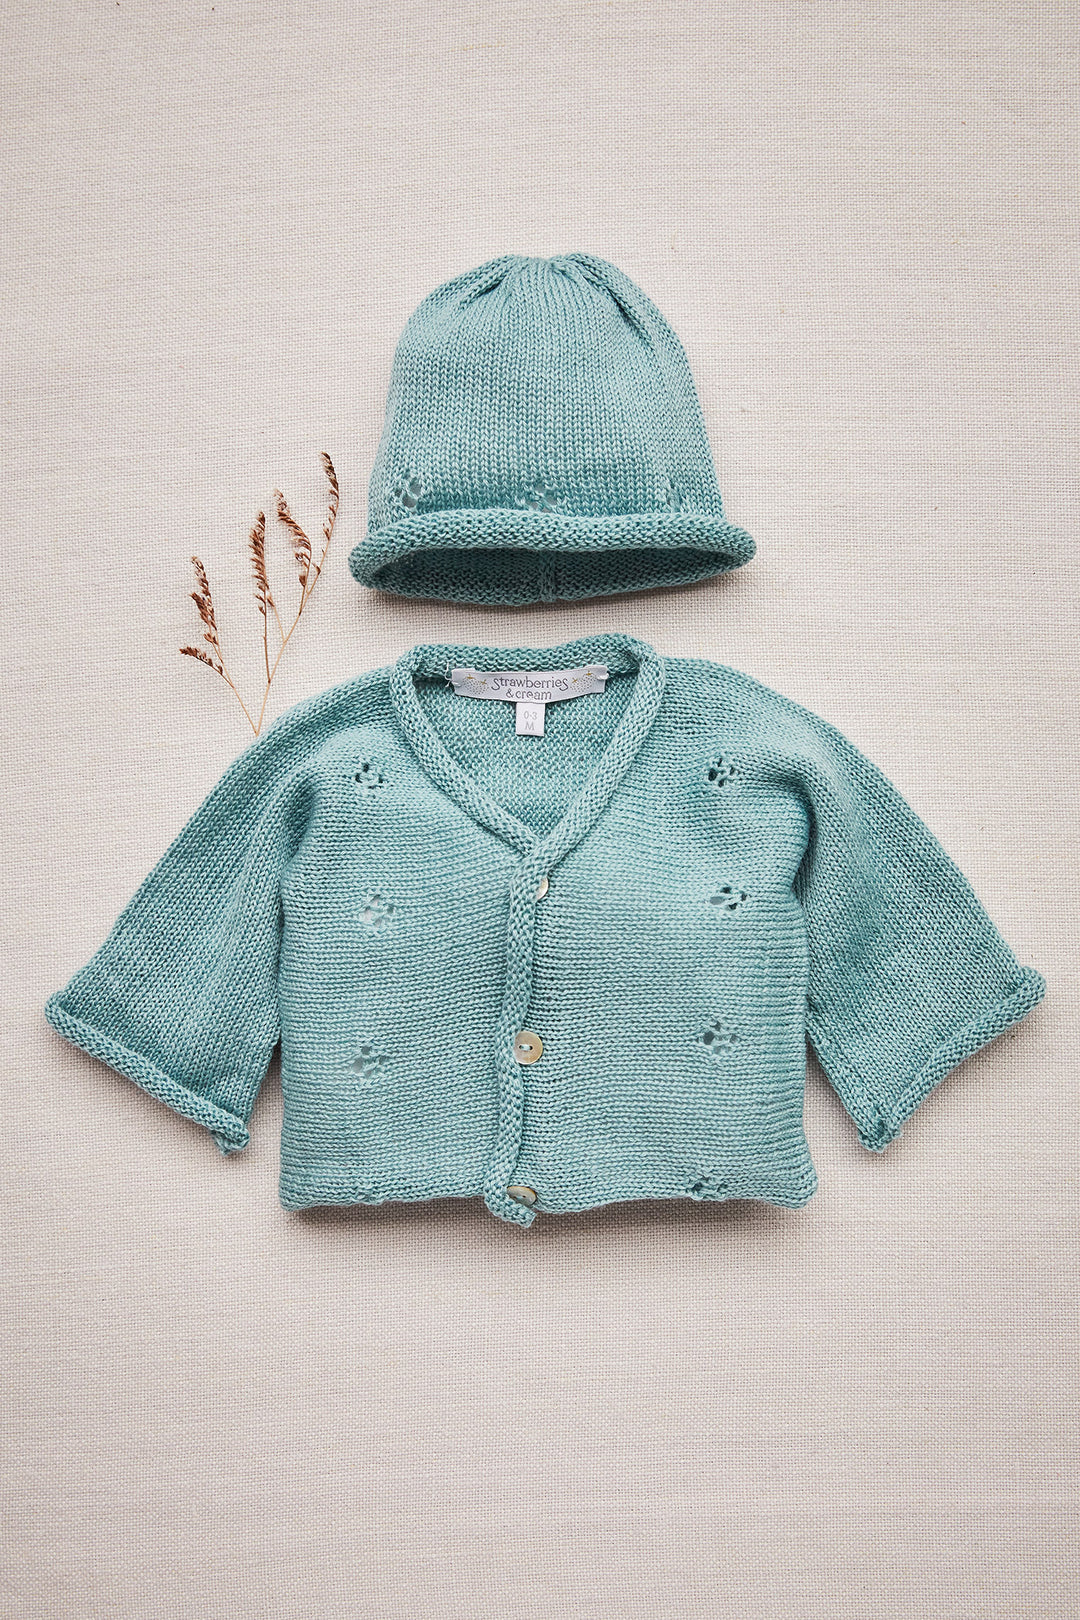 Merino Cardigan and Hat Set in Teal